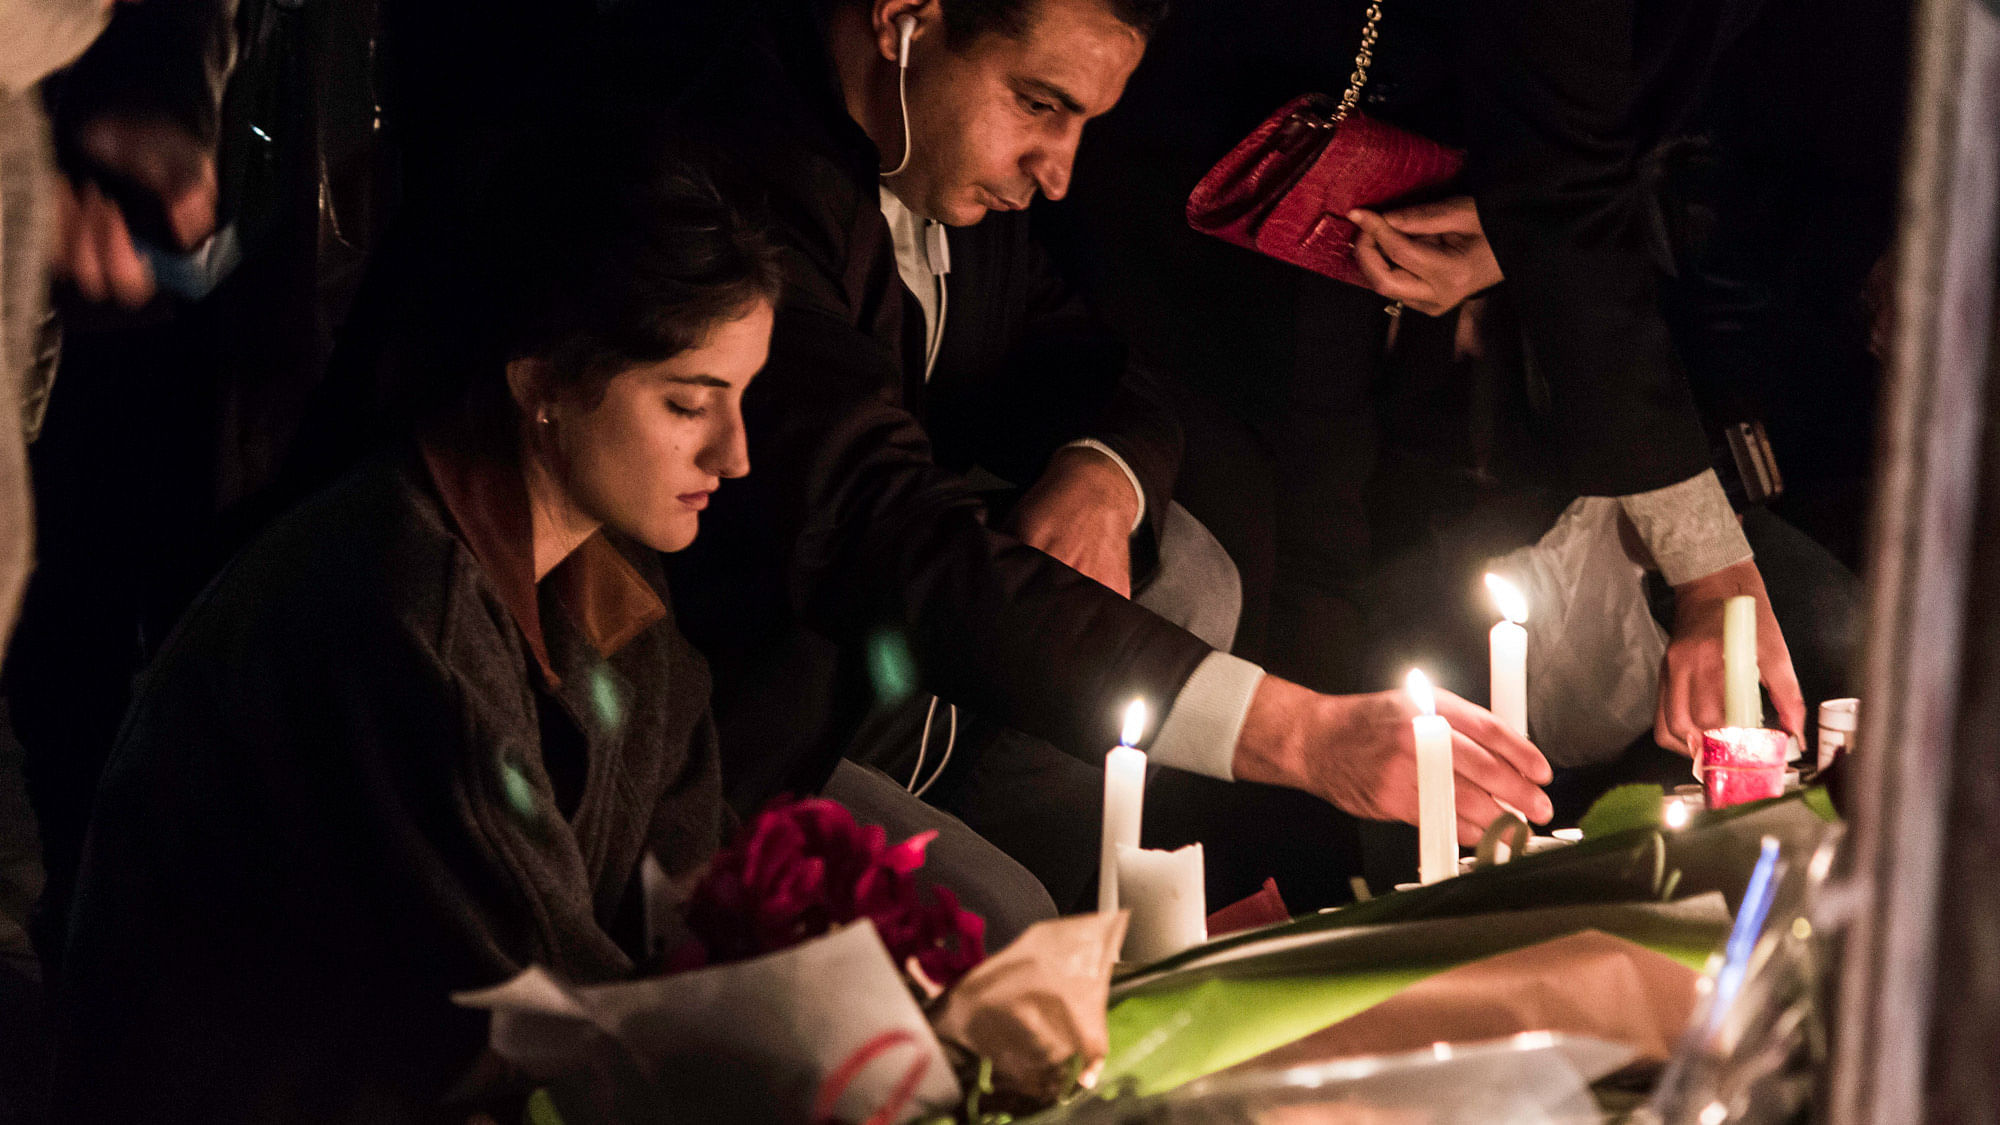 A young woman mourns the deaths of innocent civilians in the 13/11 terror attacks in Paris. (Photo: Karan Sarnaik)